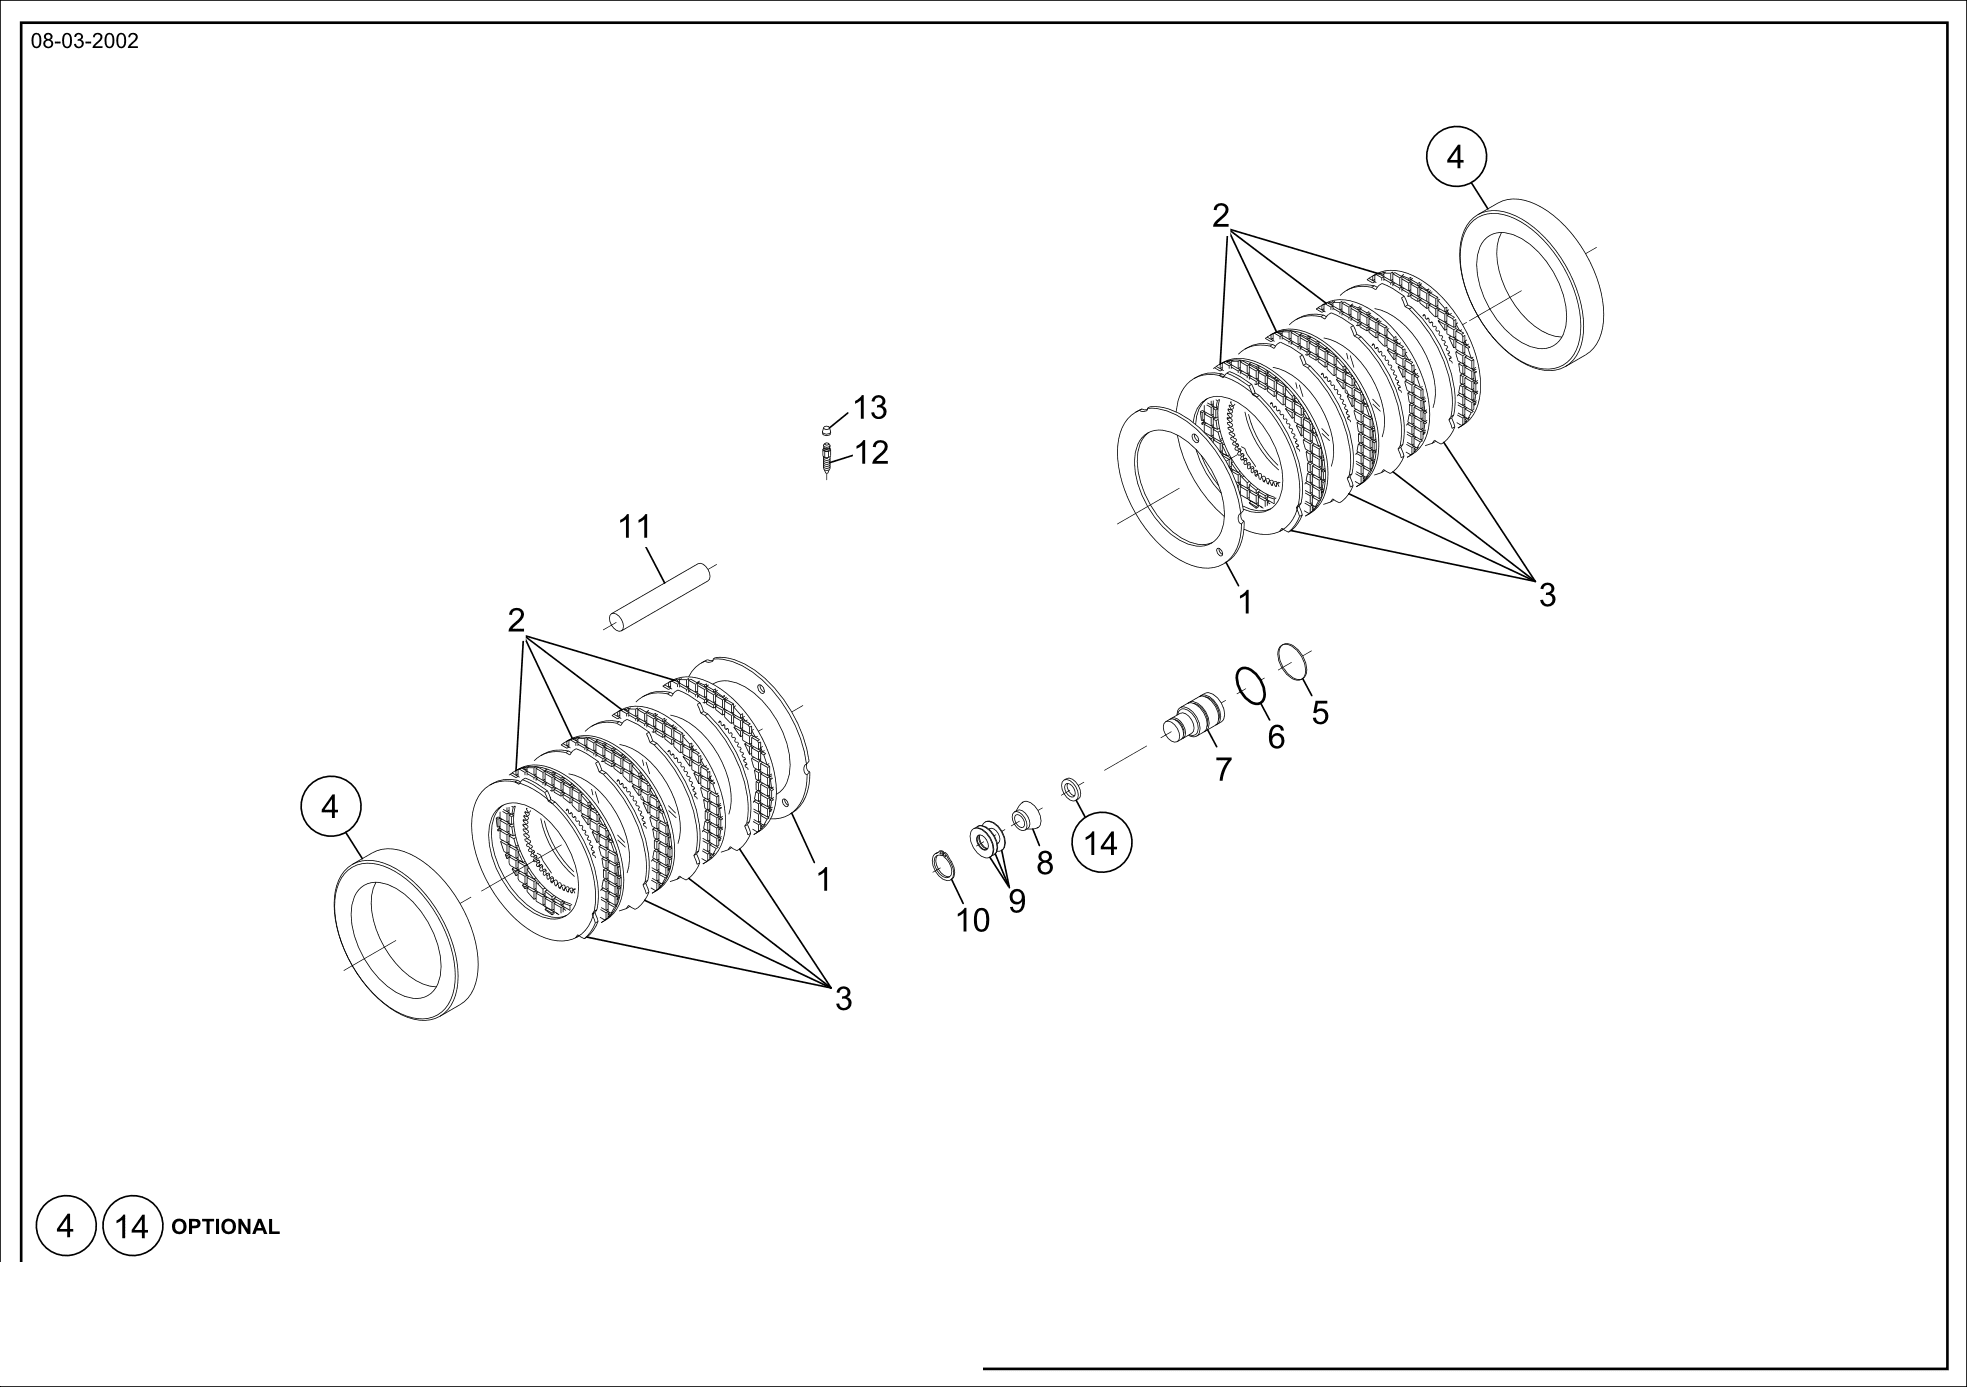 drawing for BRODERSON MANUFACTURING 0-055-00166 - SPACER (figure 2)